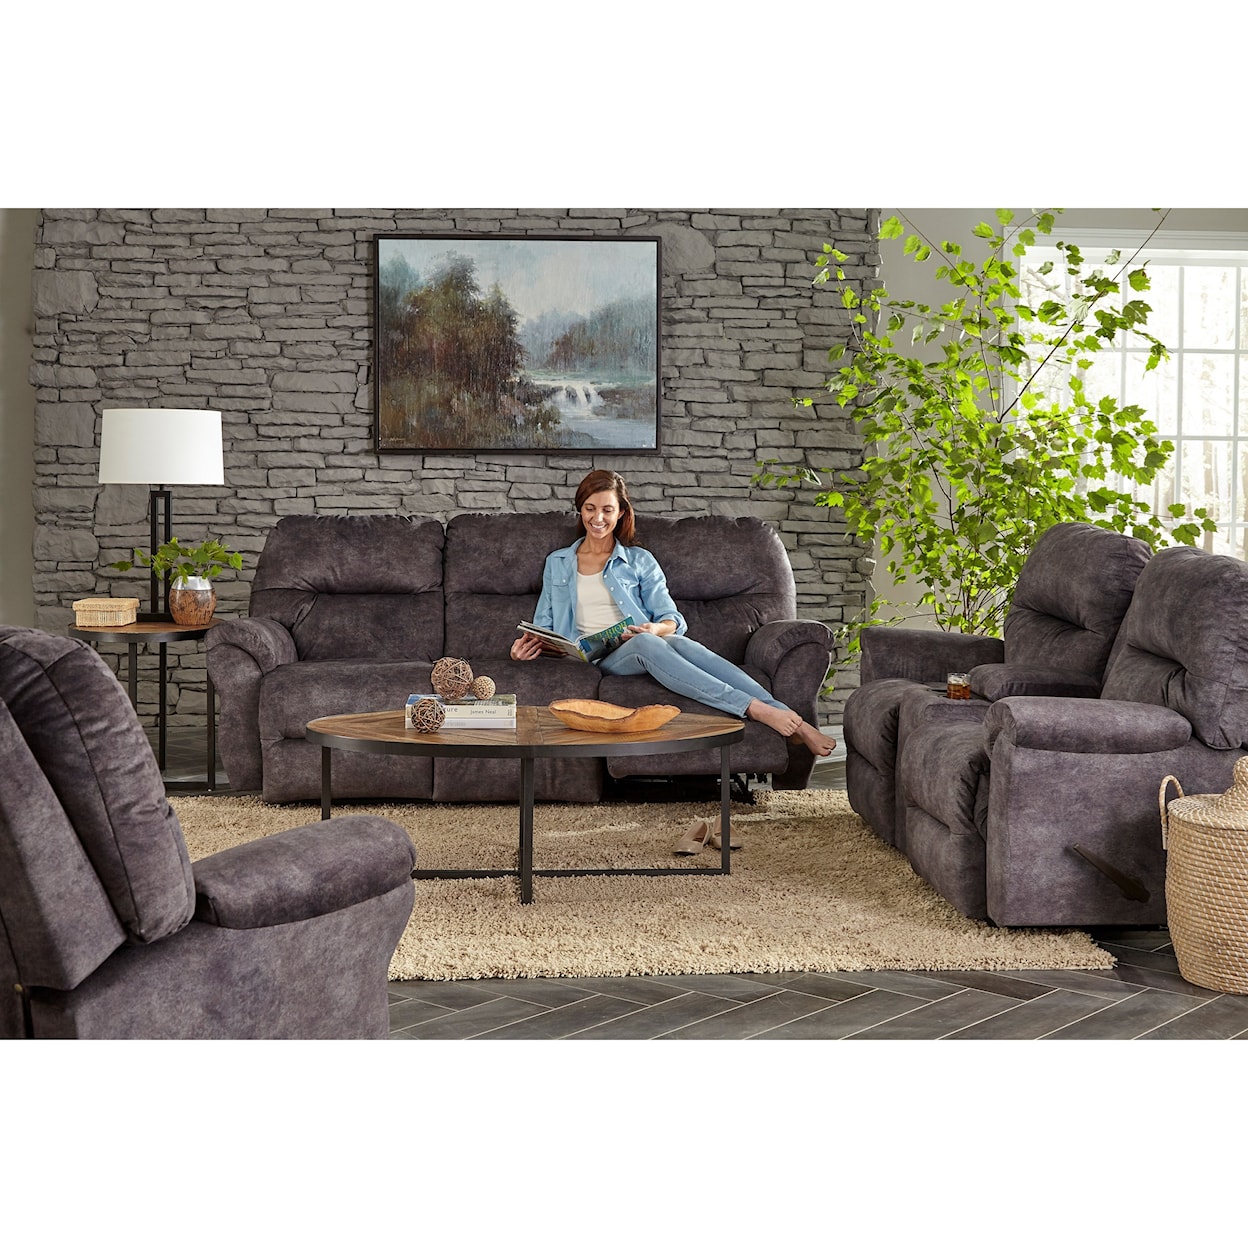 Best Home Furnishings Bodie Space Saver Reclining Loveseat